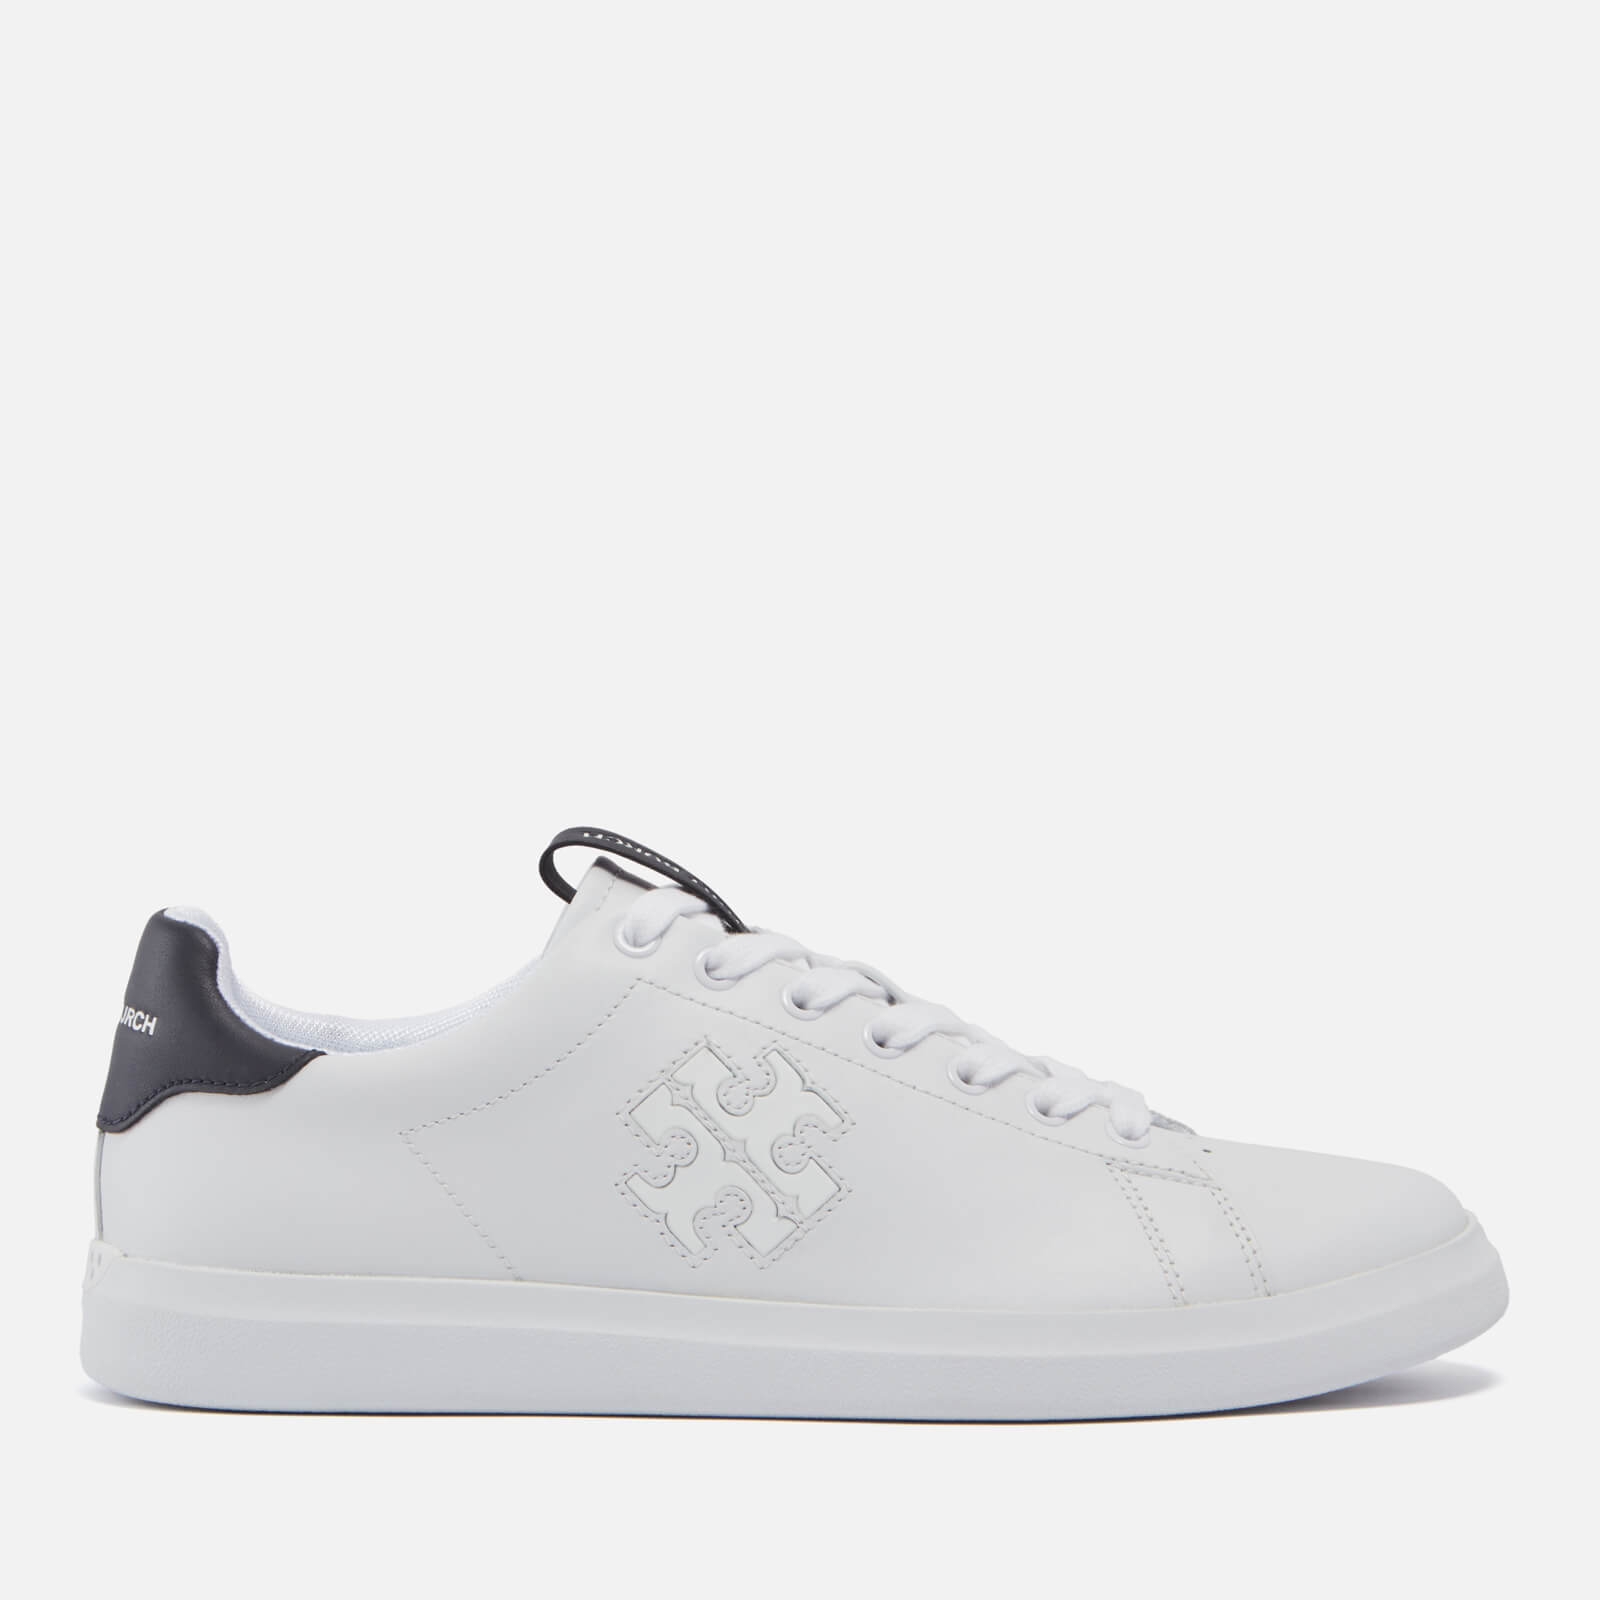 Tory Burch Women’s Howell Leather Trainers